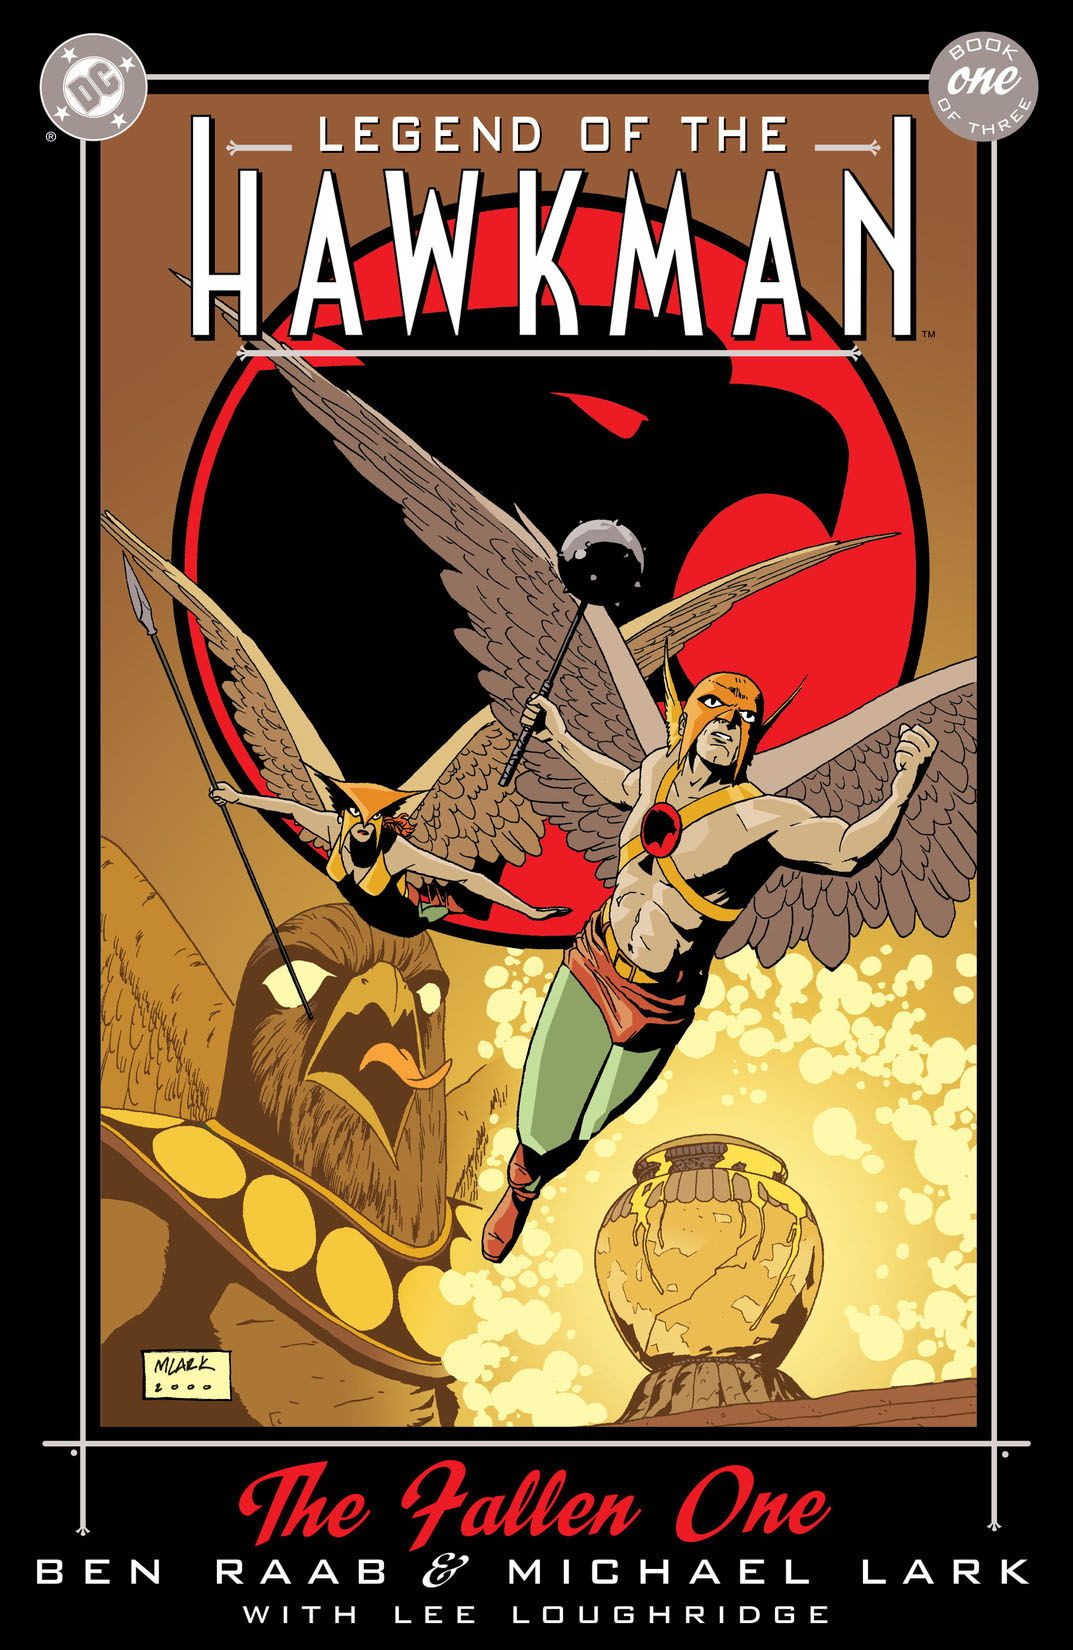 Legend of the Hawkman #1 preview images